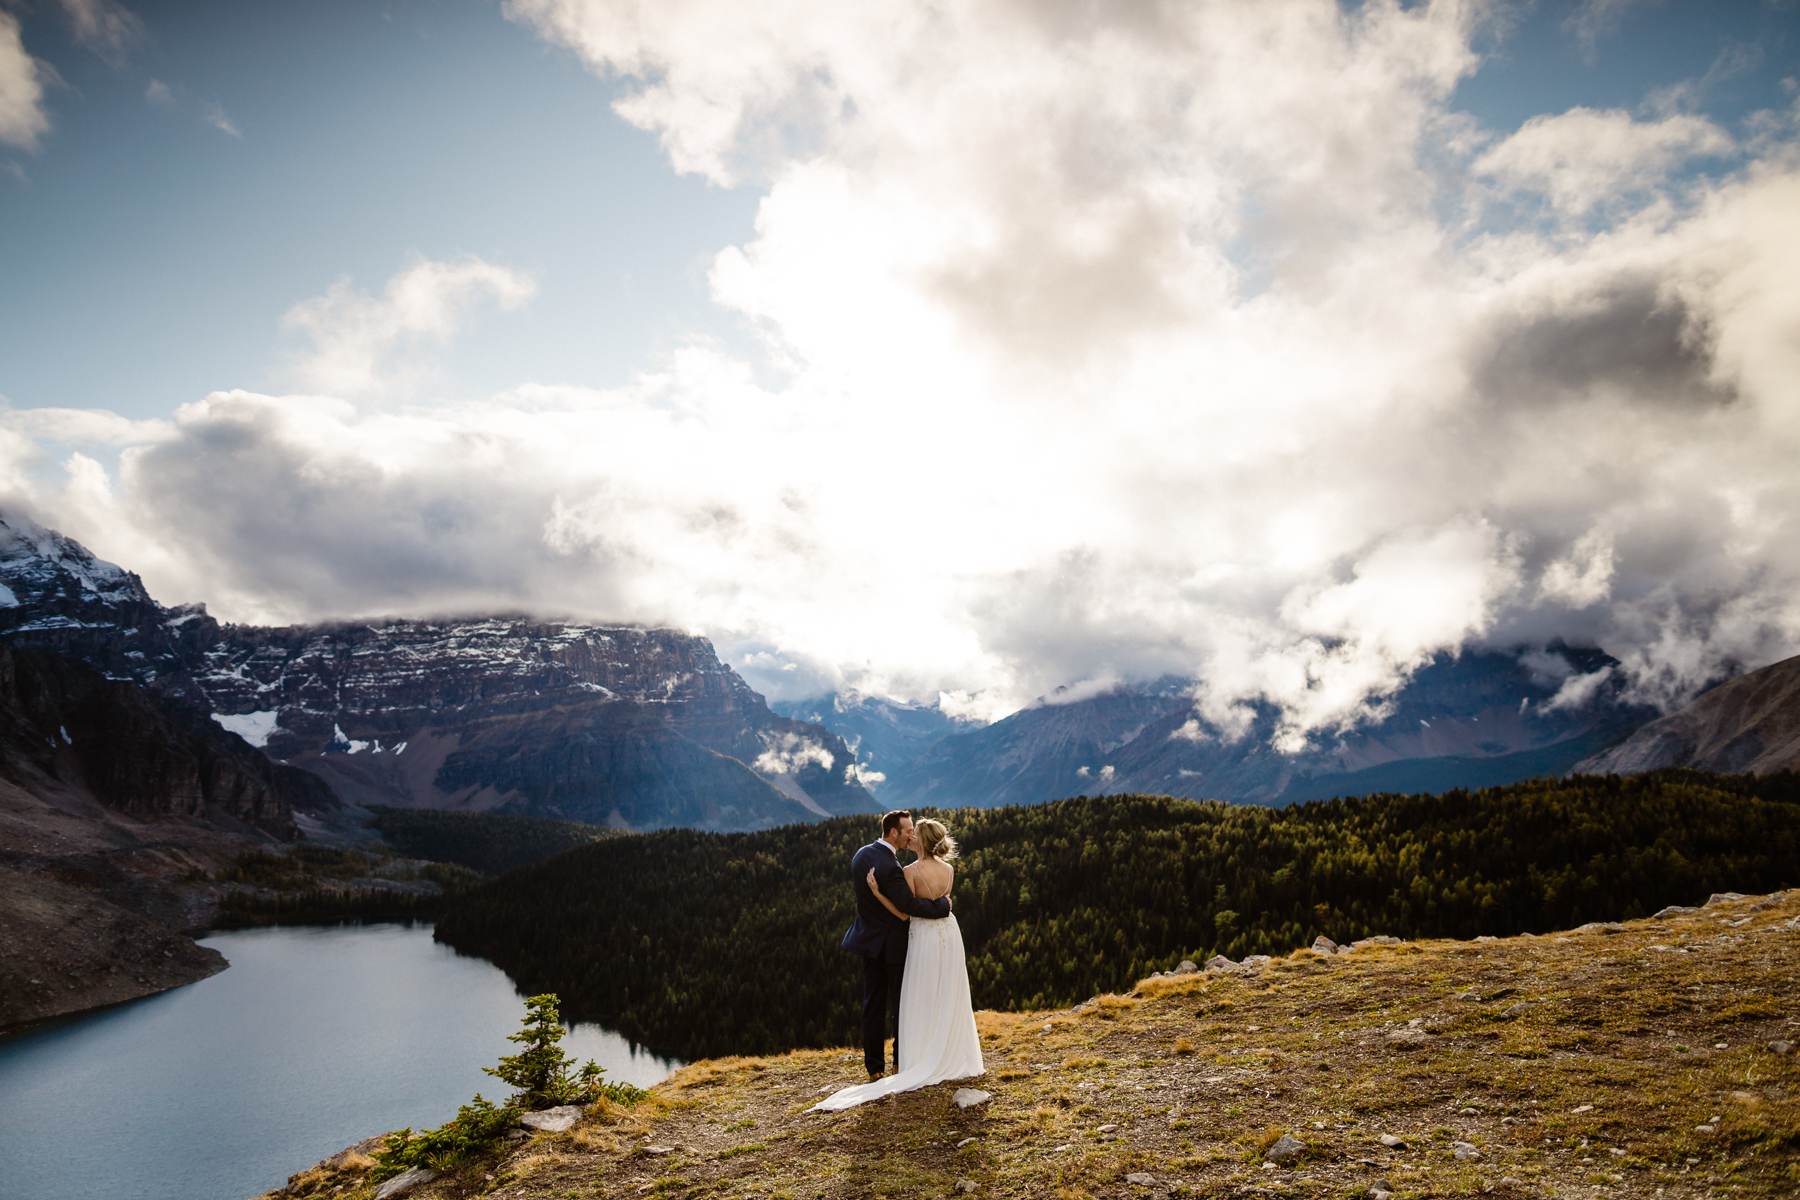 Mount Assiniboine Elopement Photographers at a Backcountry Lodge - Photo 24